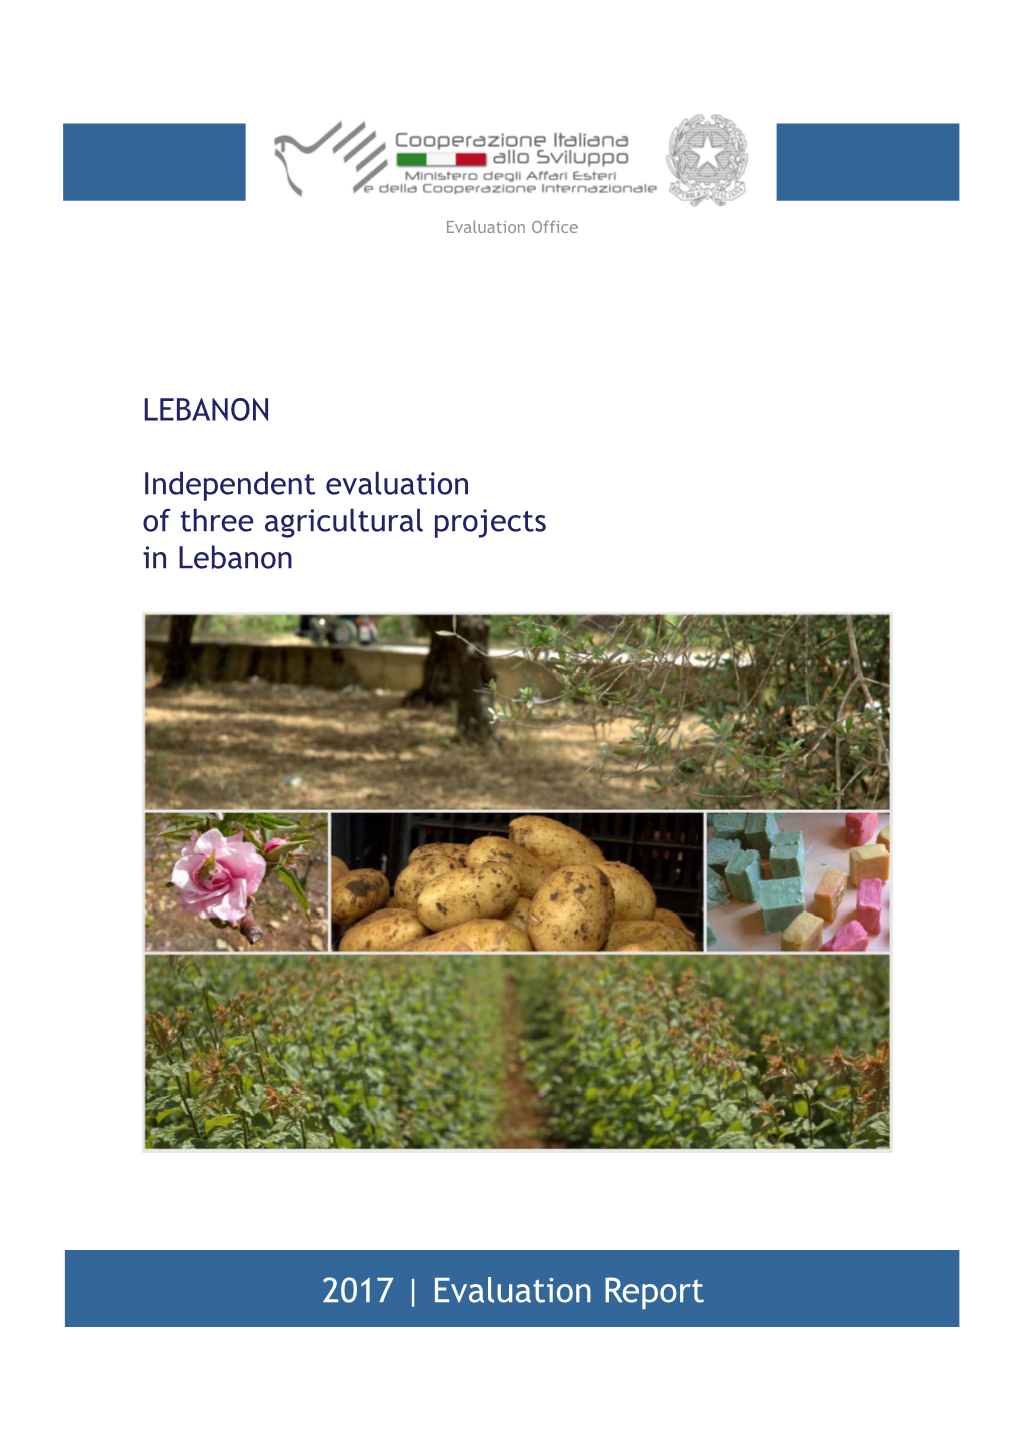 Evaluation Report 3 Agricultural Projects